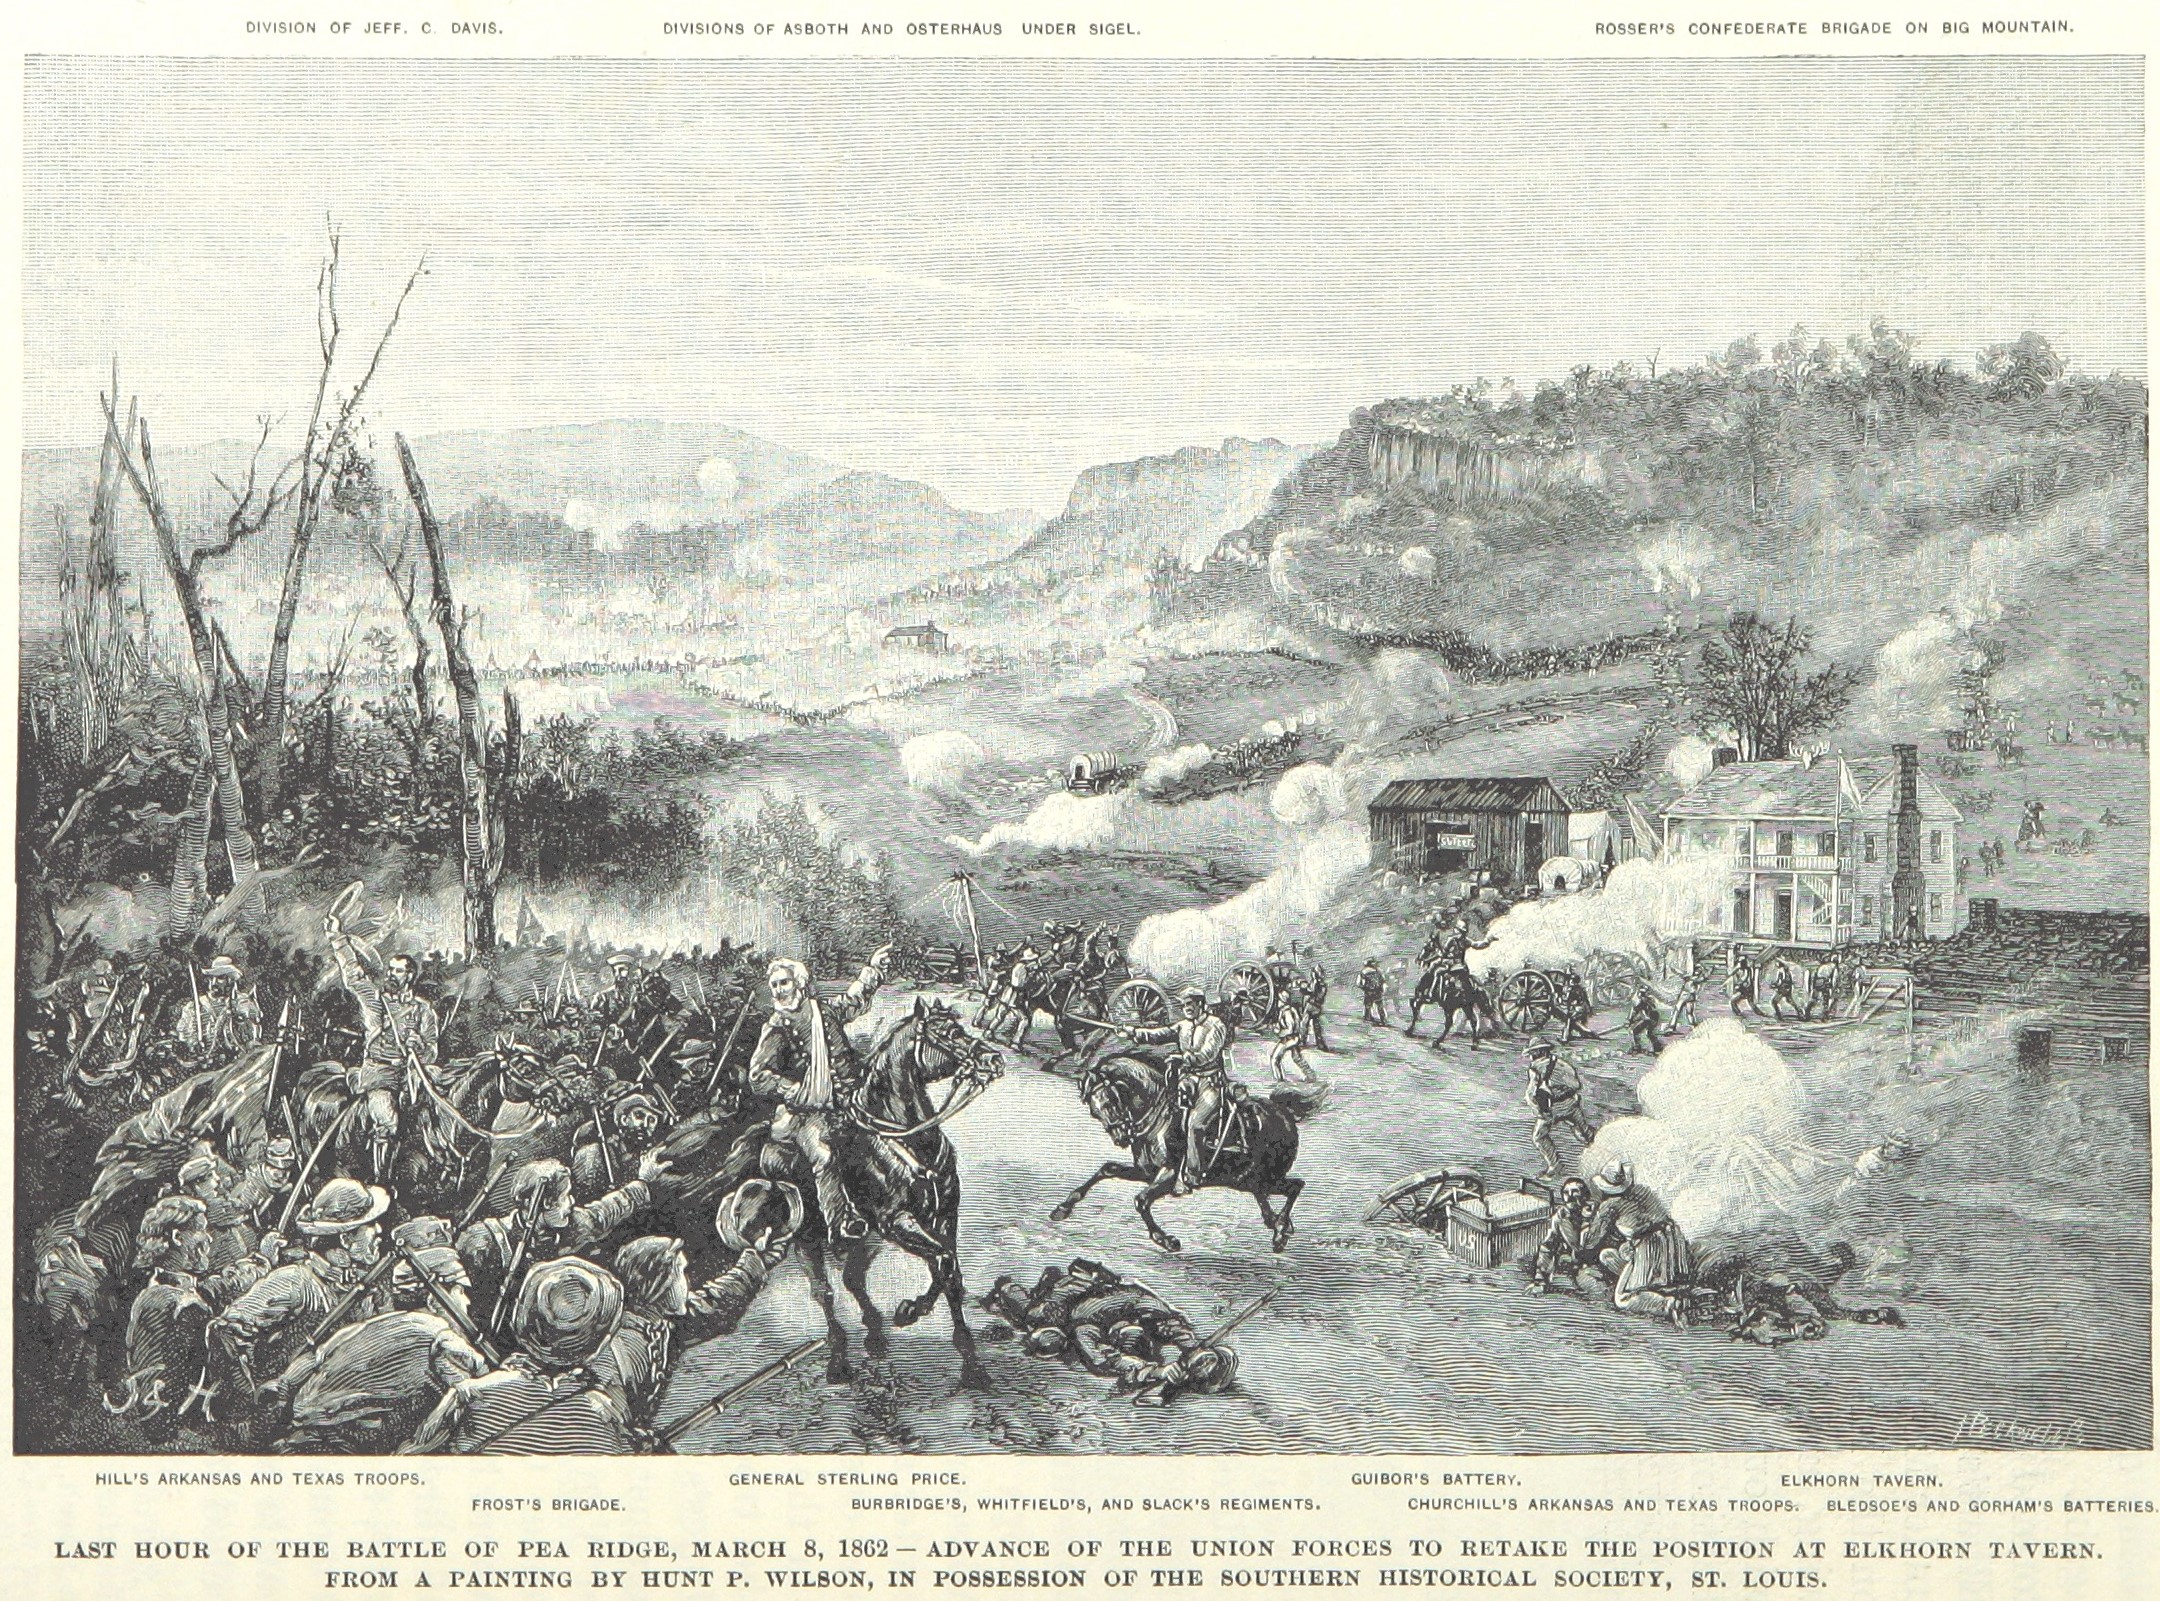 The last hour of the Battle of Pea Ridge. Union forces advance to retake the position near Elkhorn Tavern, p. 58 of the 1887 book “Battles and Leaders of the Civil War, being for the most part contributions by Union and Confederate officers, based upon ‘the Century War Series’”, volume 1, Robert Underwood Johnson and Clarence Clough Buel (authors). From a painting by Hunt P. Wilson.